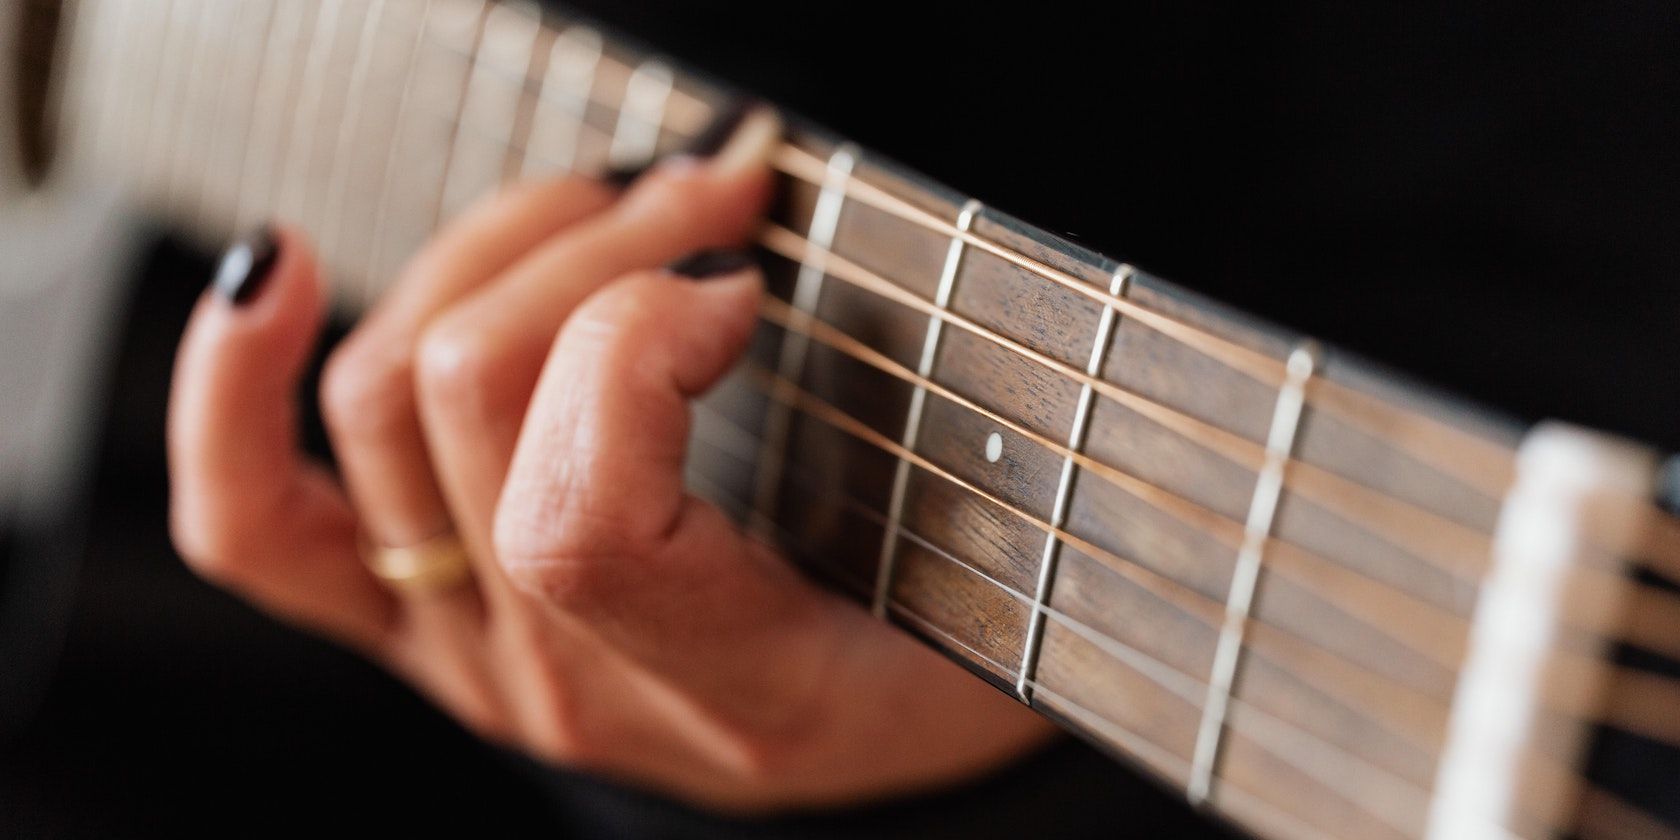 A focused shot of a hand with painted nails and wearing a ring, positioning on the neck of a guitar.